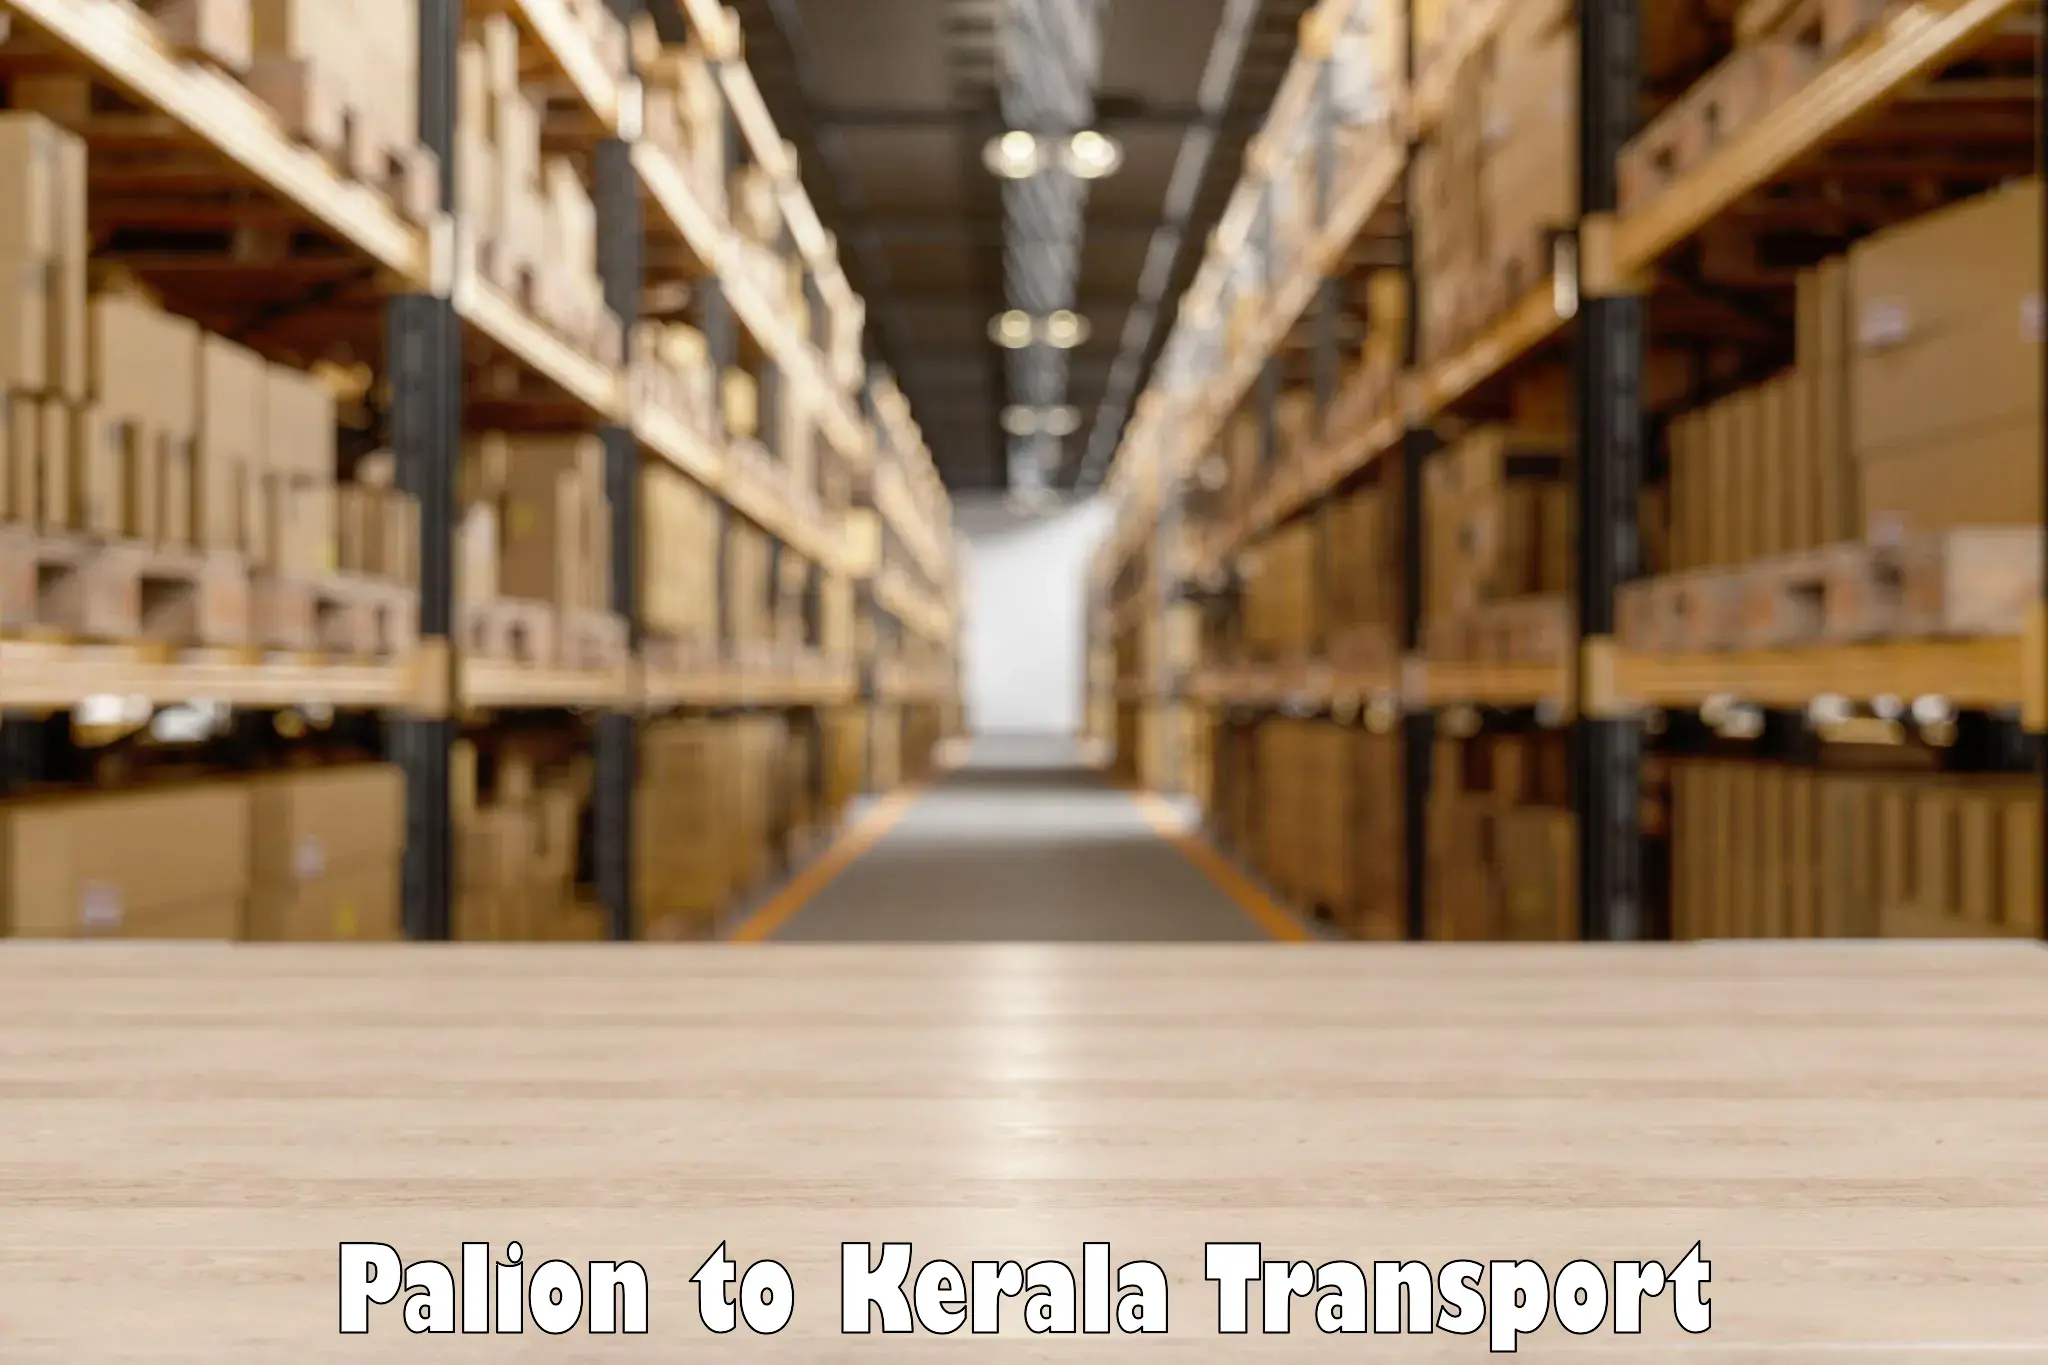 Nearby transport service Palion to Kilimanoor